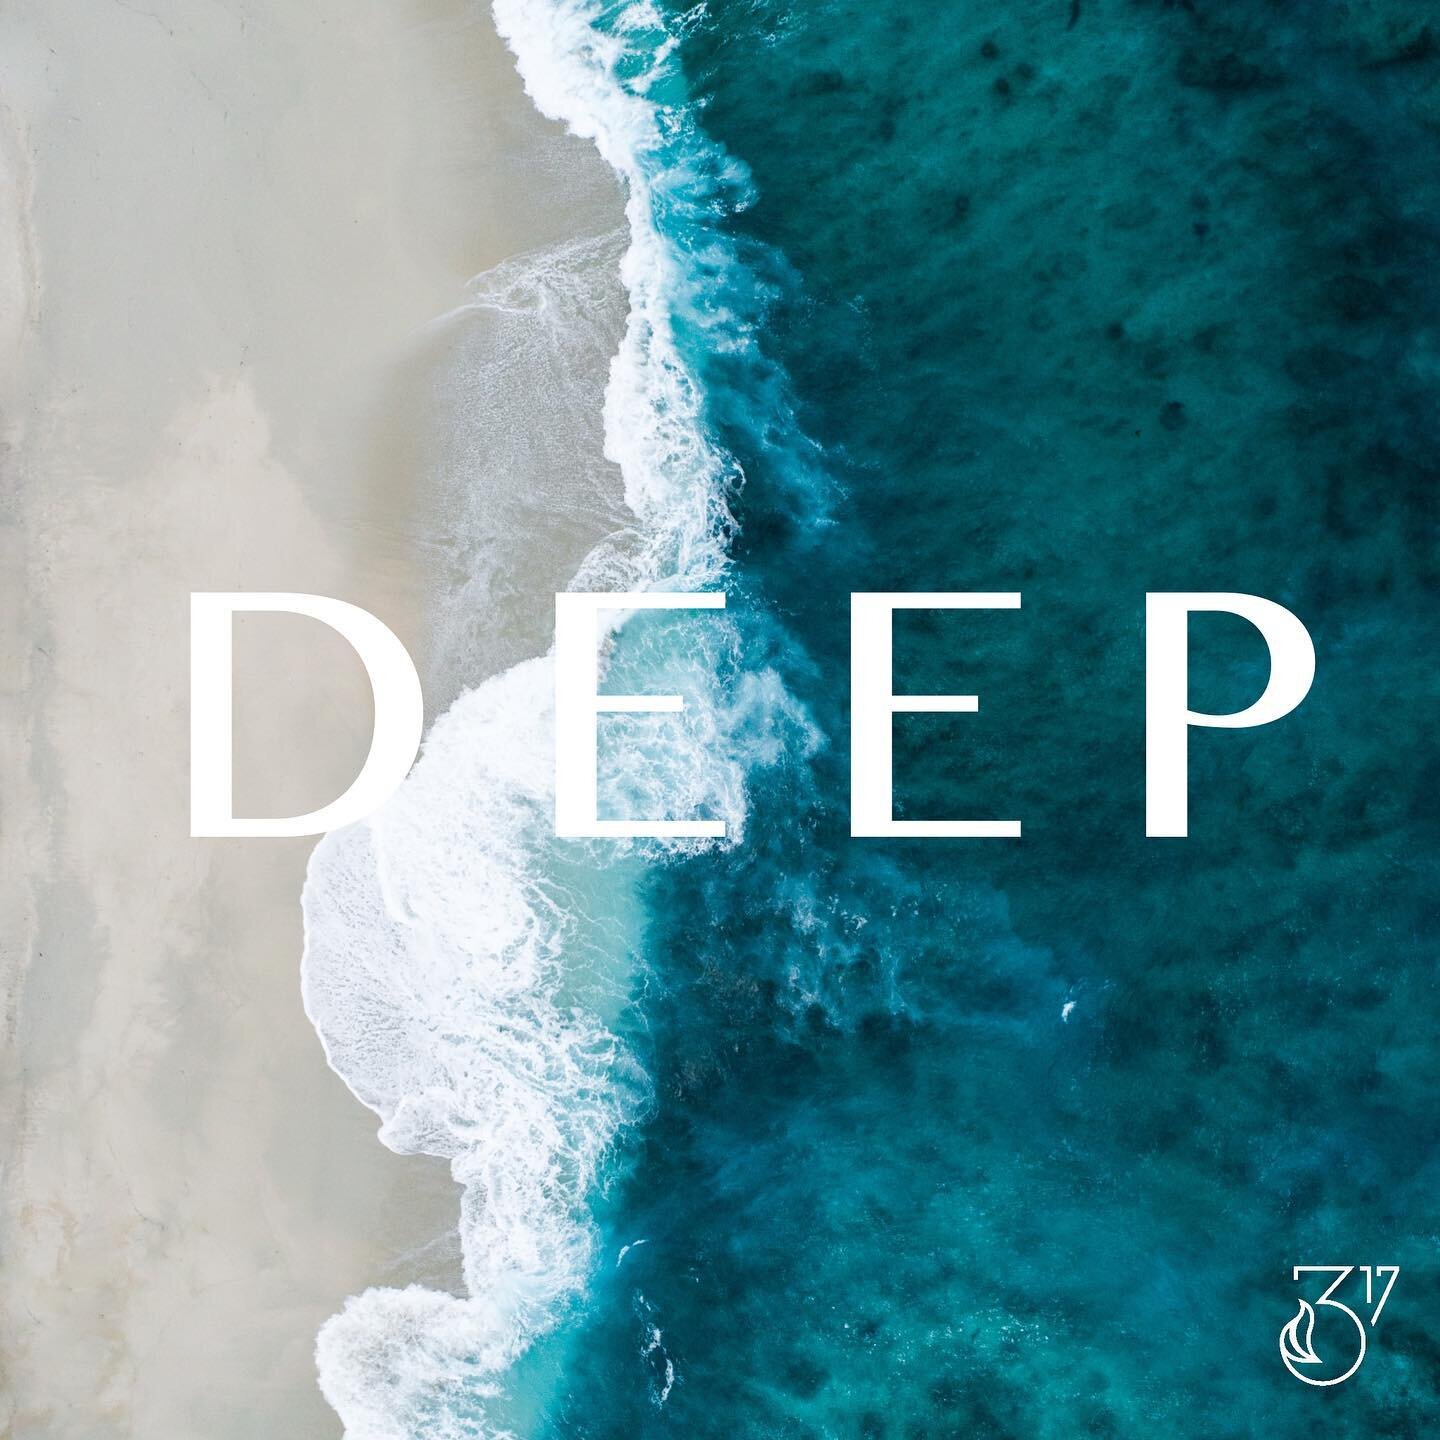 IT&rsquo;S TIME TO GO DEEP!
.
🔥We are THRILLED to announce our Deep Encounter Retreat 2022, in the Sacramento, CA area, July 29th-30th! A set apart power packed 2 full days, to seek and encounter God&rsquo;s DEEP love, healing, and freedom with a be